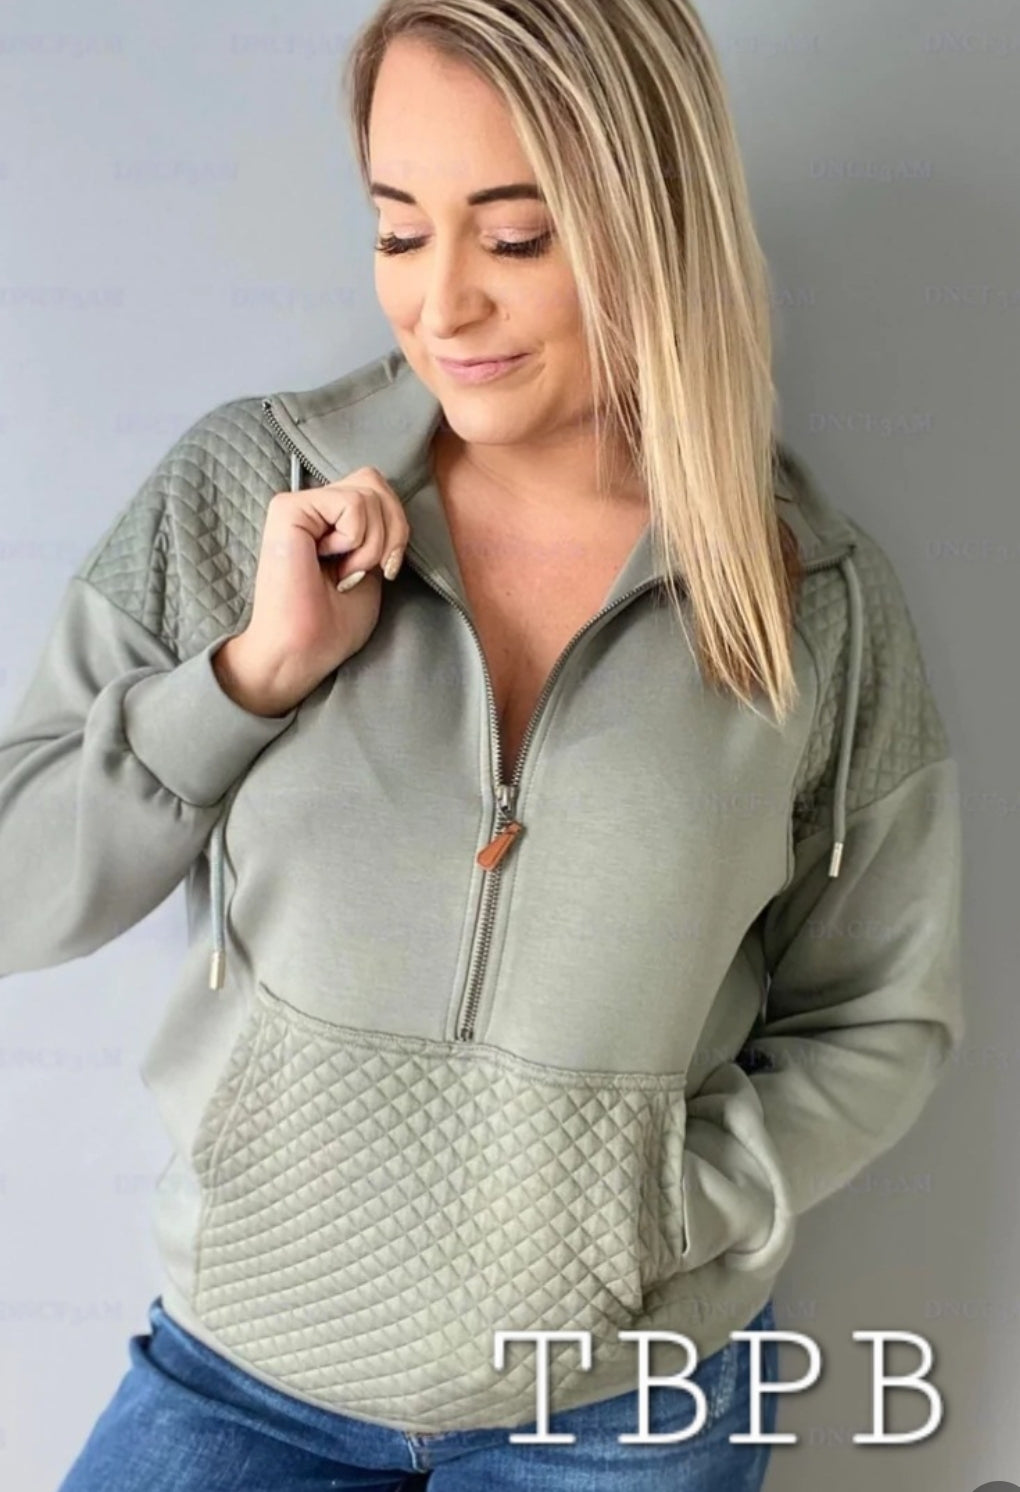 The Quinn Quilted Half-Zip – The Blue Pineapple Boutique